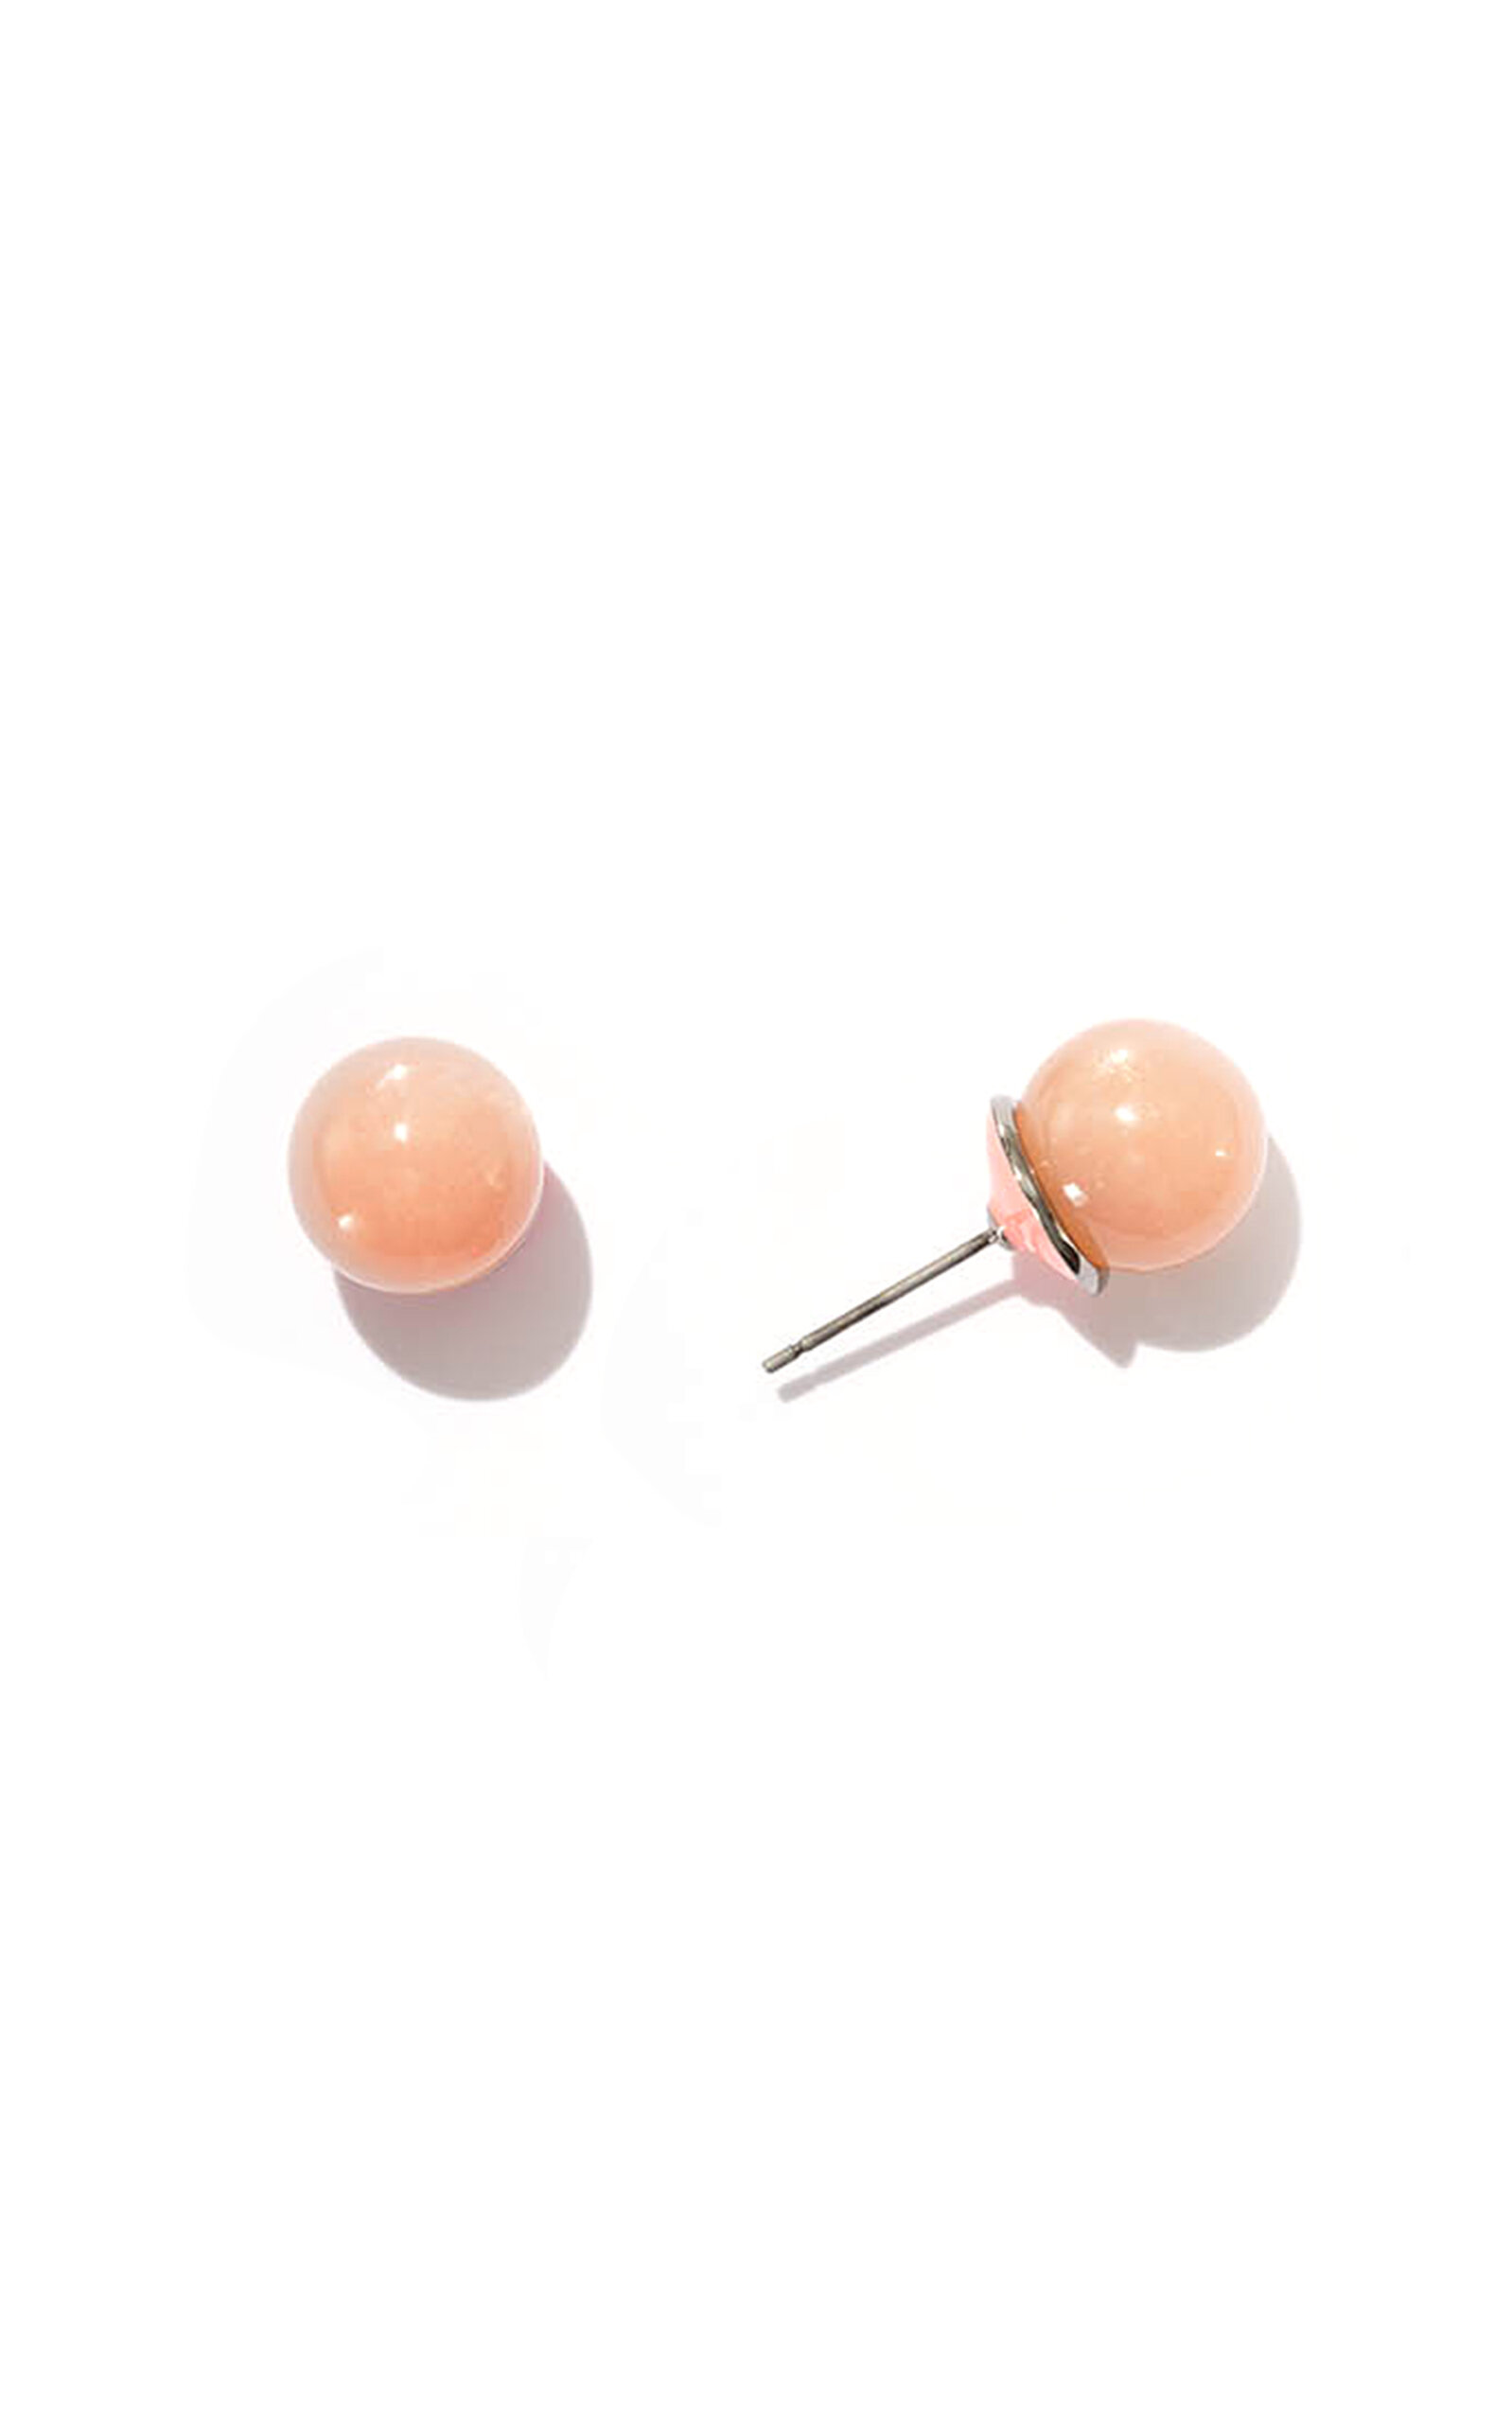 Large Push Pin Studs with Peach Moonstones